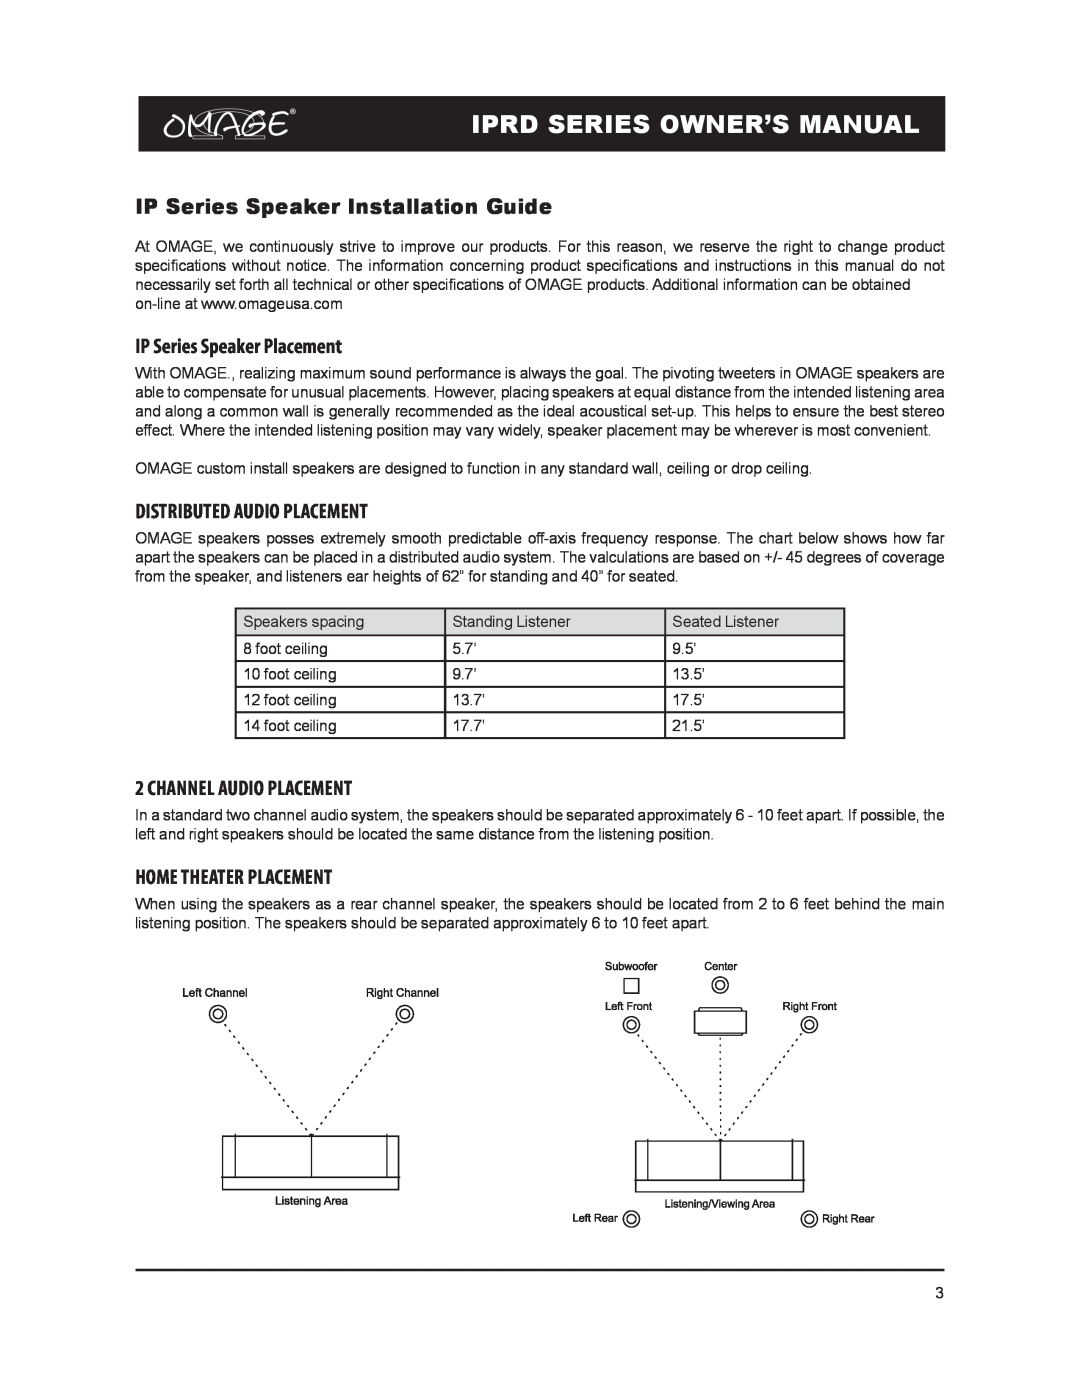 Omage IPRD8 owner manual IP Series Speaker Installation Guide, IP Series Speaker Placement, Distributed Audio Placement 